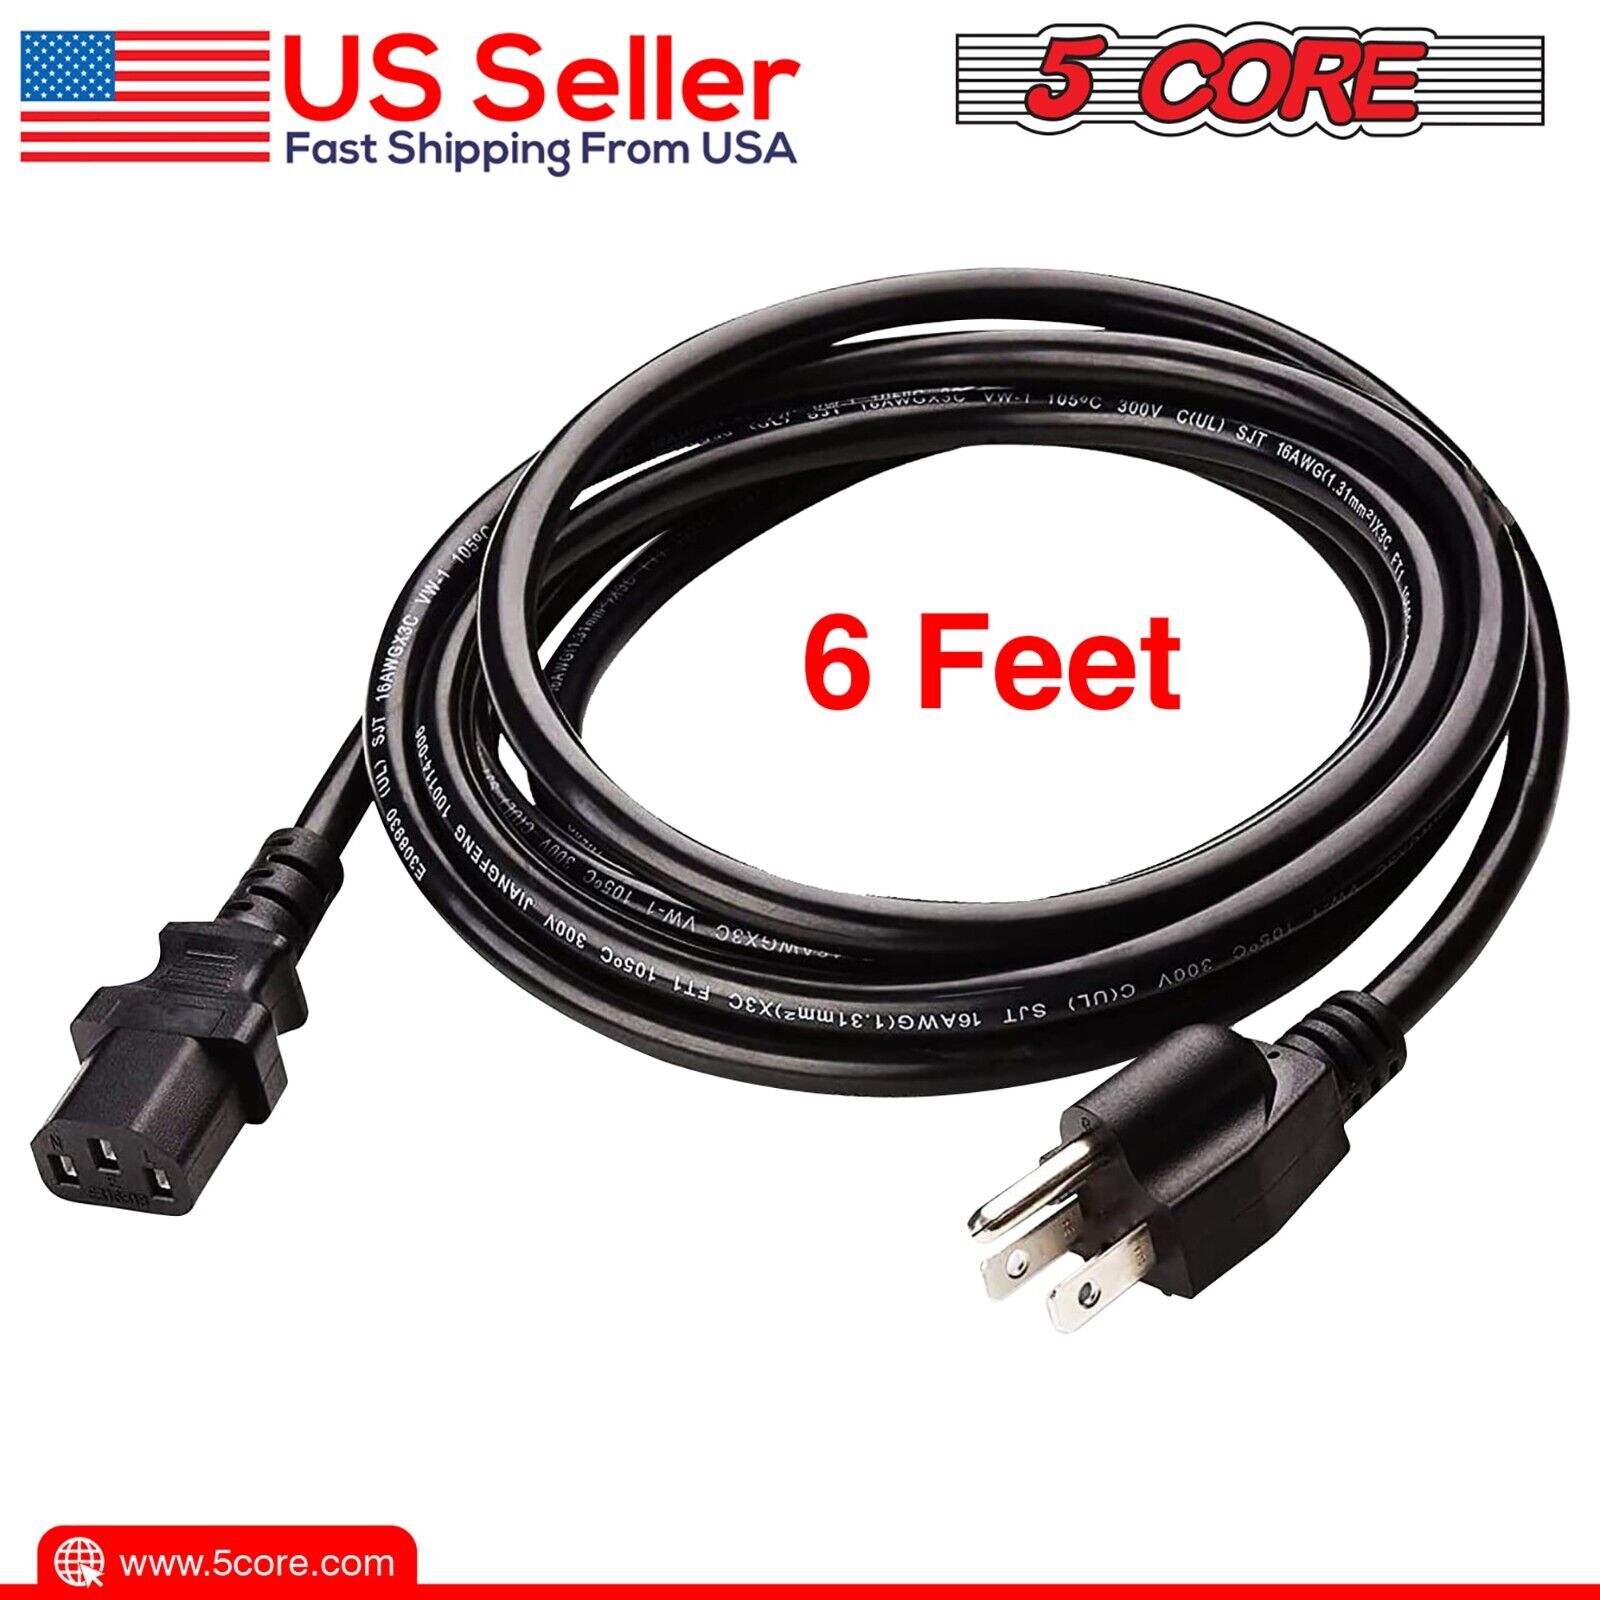 Lot of 1-5 Standard AC Power Cord Cable 3 Prong Plug for PC Monitor Printer TV